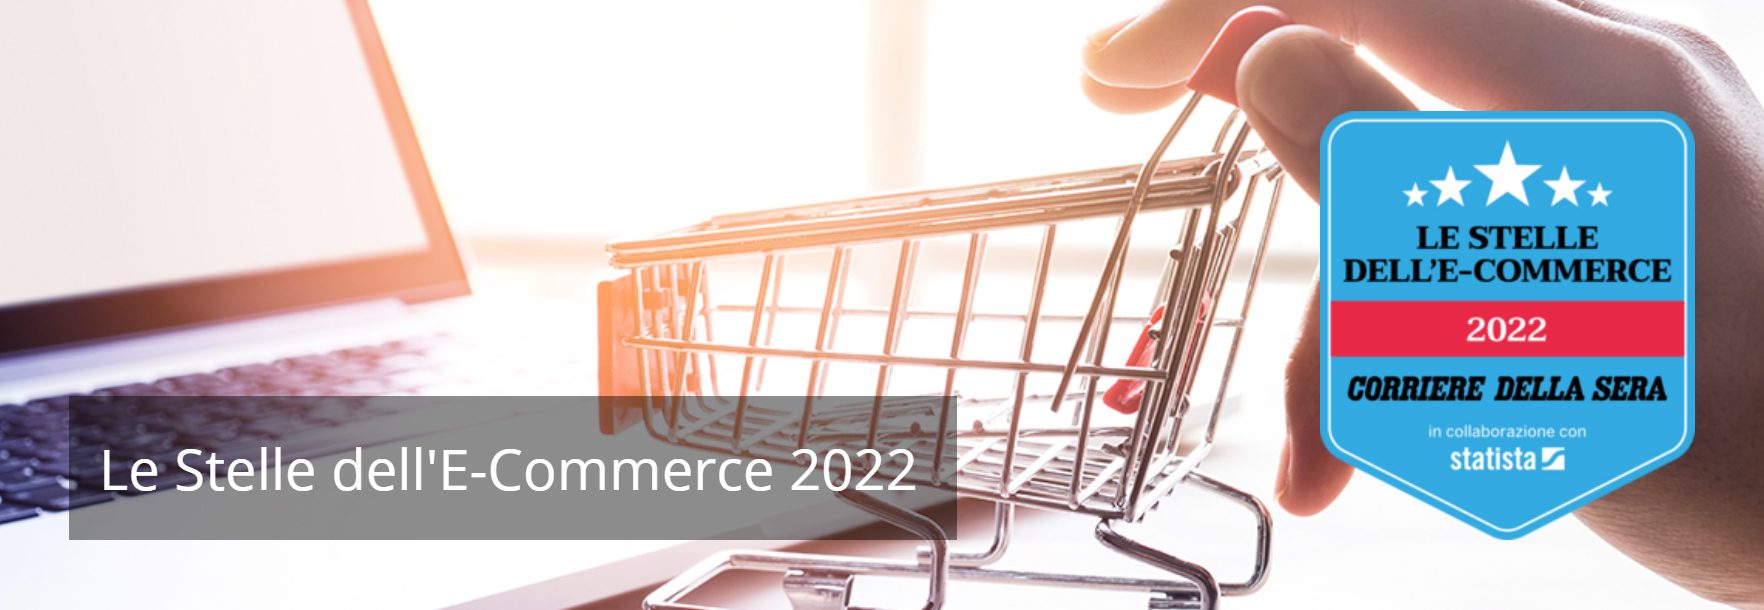 stelle dell'ecommerce